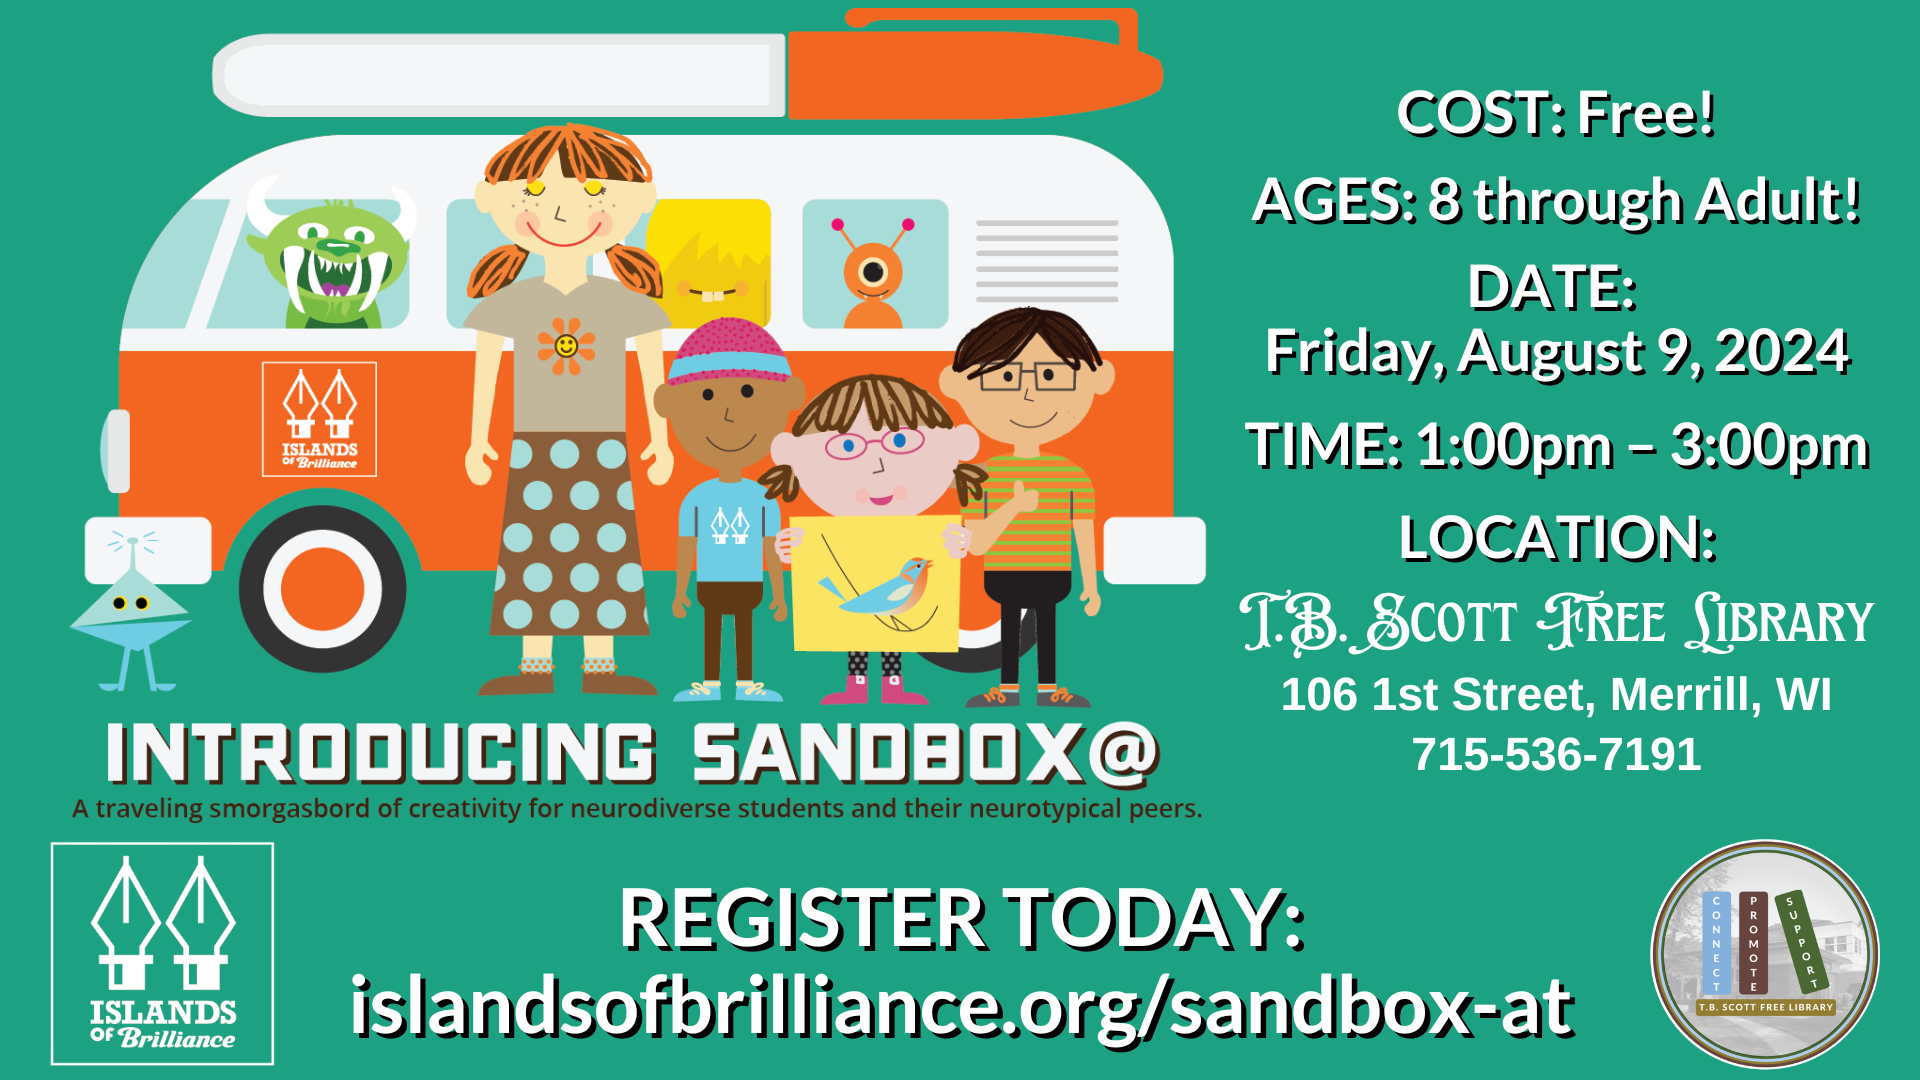 An ad for the sandbox: a fun and inclusive space for neurodiverse students and their neurotypical friends to explore creativity.